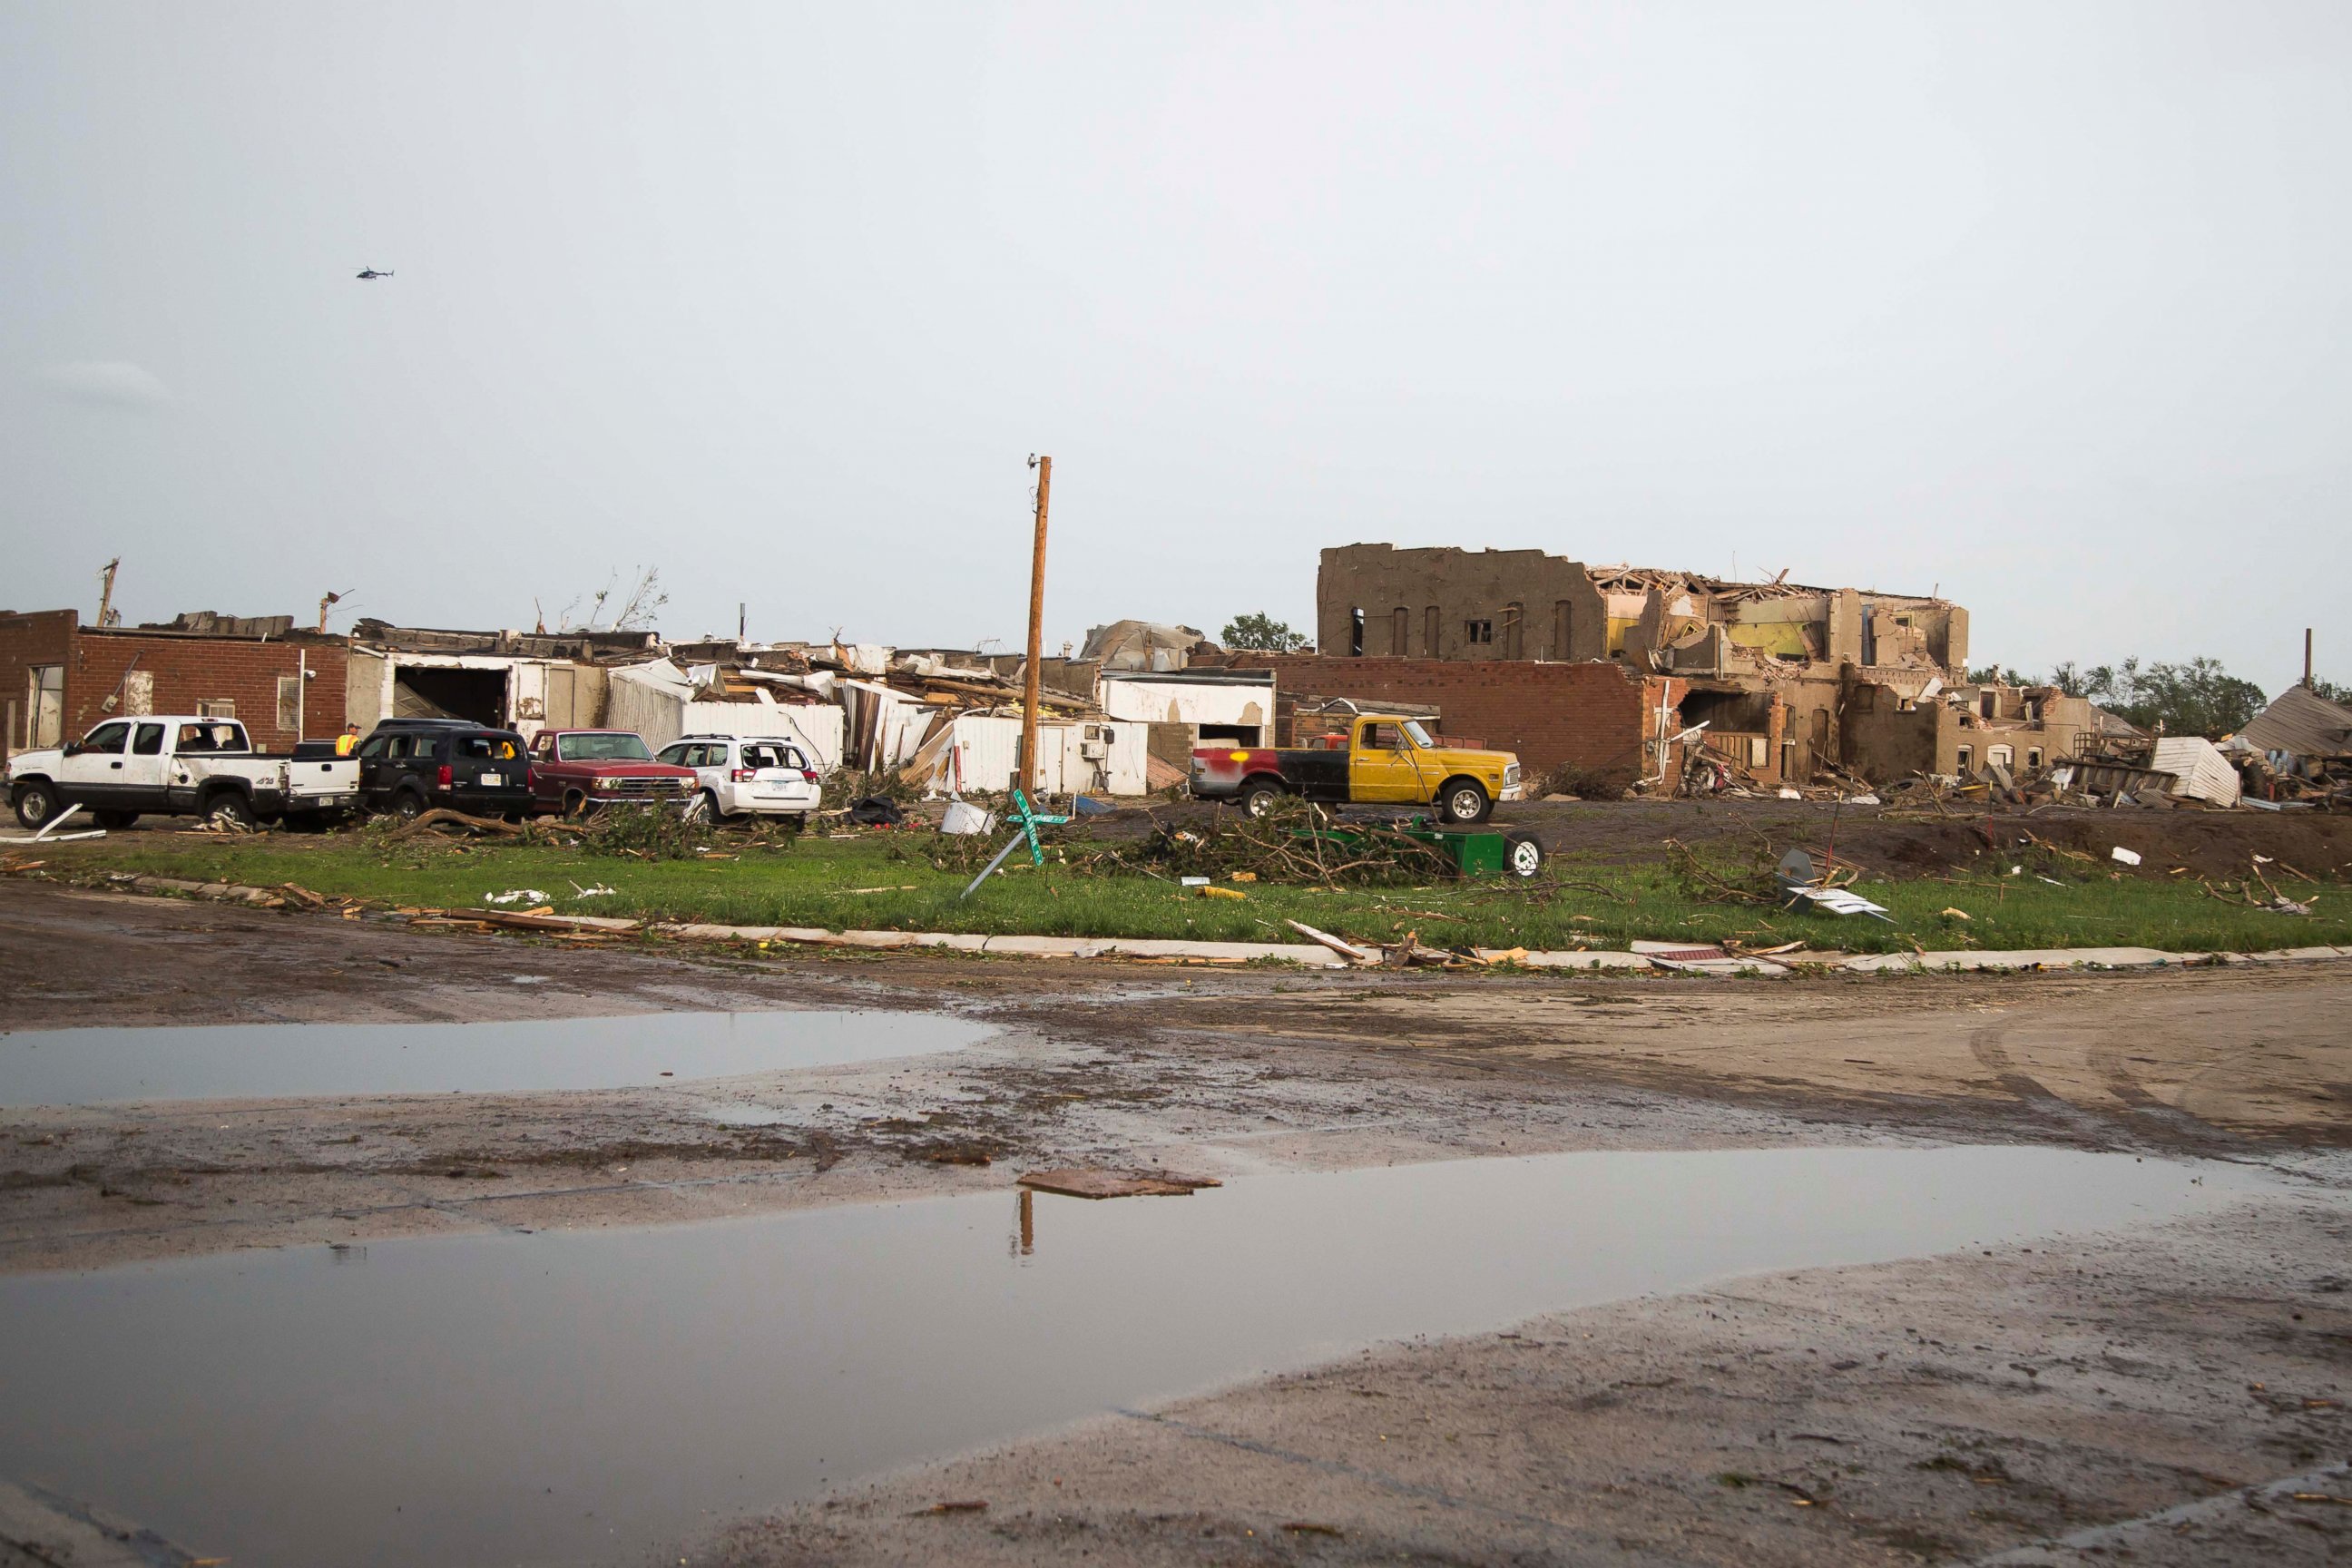 PHOTO: Severely damaged homes and buildings are seen after a tornado, June 16, 2014, in Pilger, Neb.